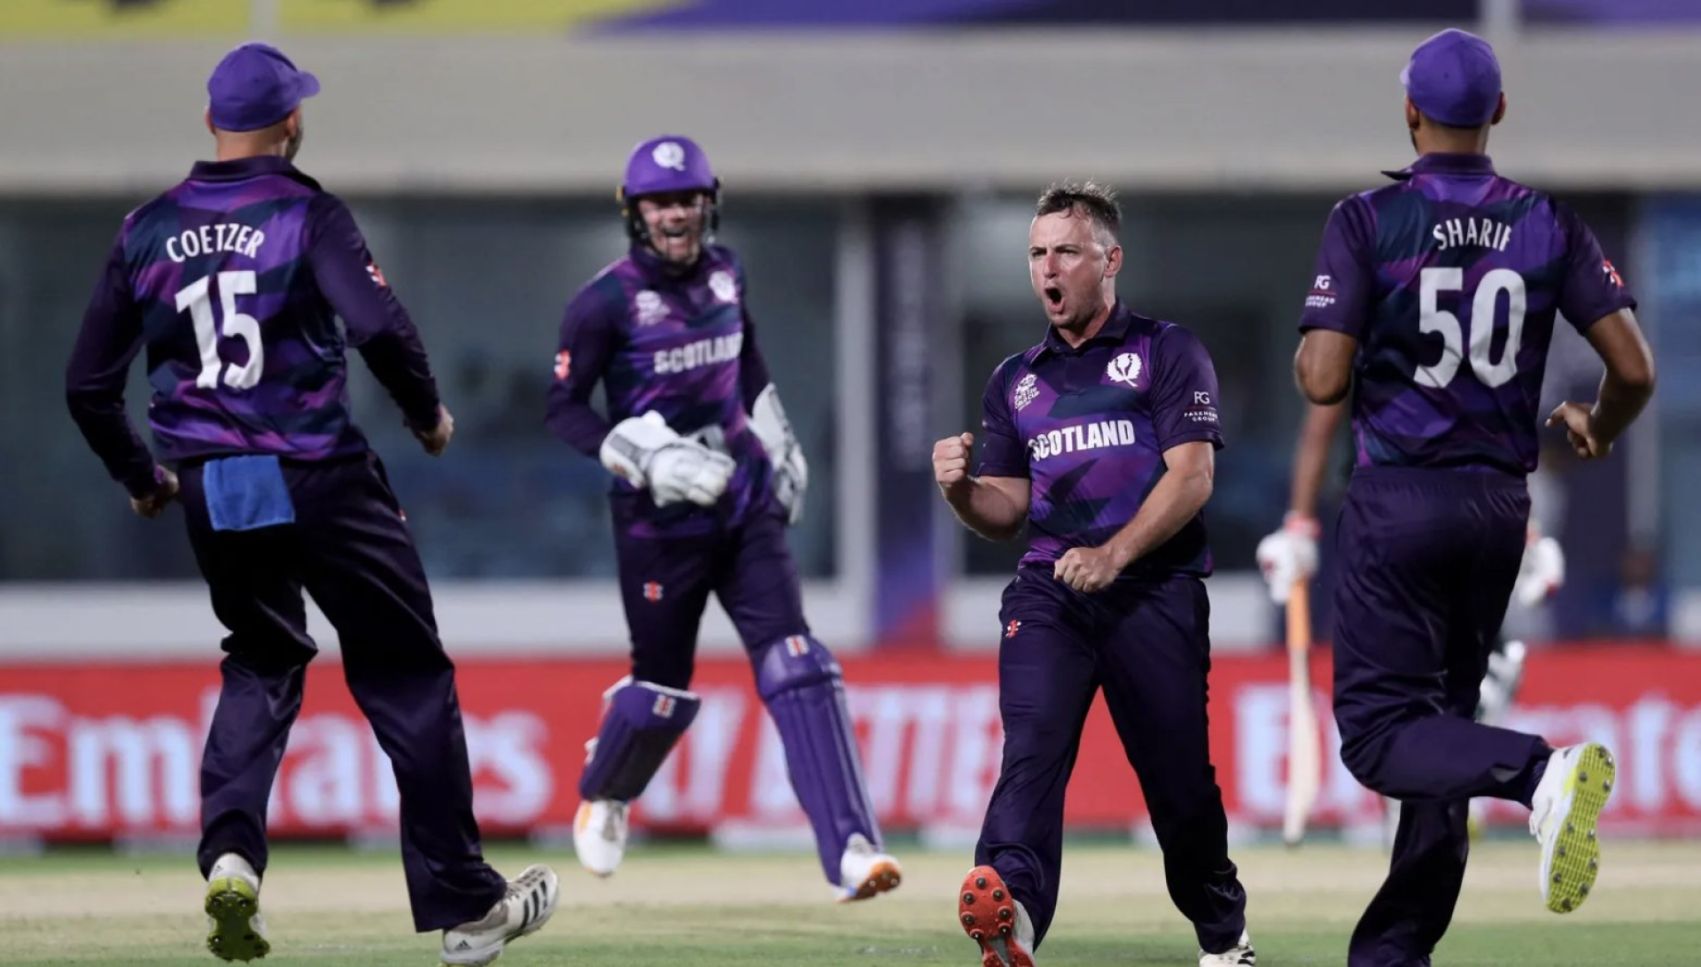 Chris Greaves, the Amazon delivery guy who drove Scotland to a famous win over Bangladesh